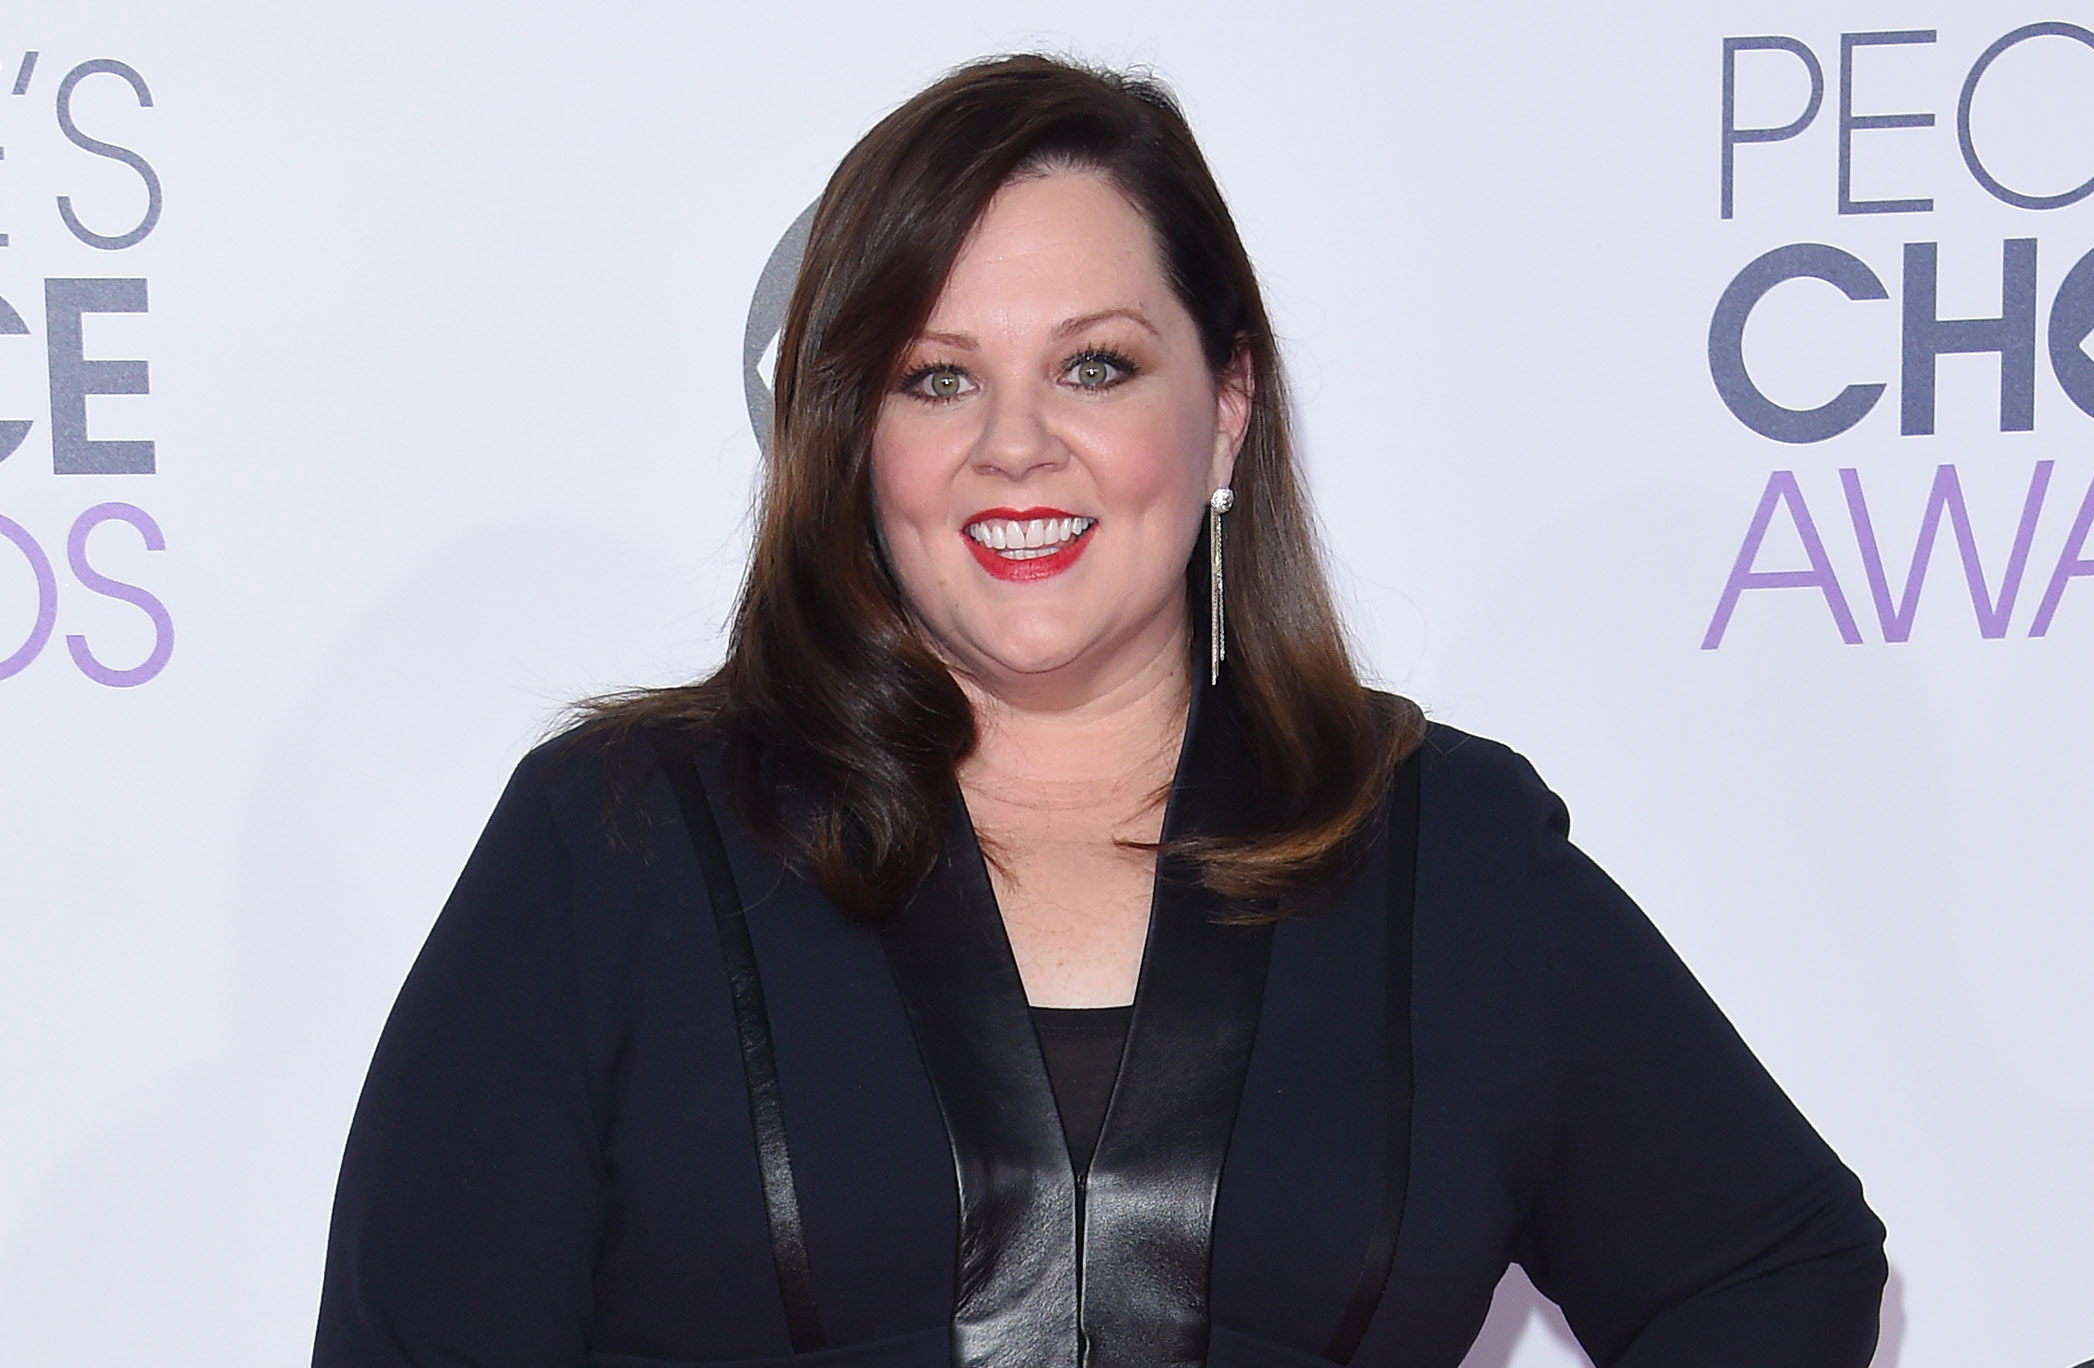 Serious Concerns Raised About Melissa McCarthy.